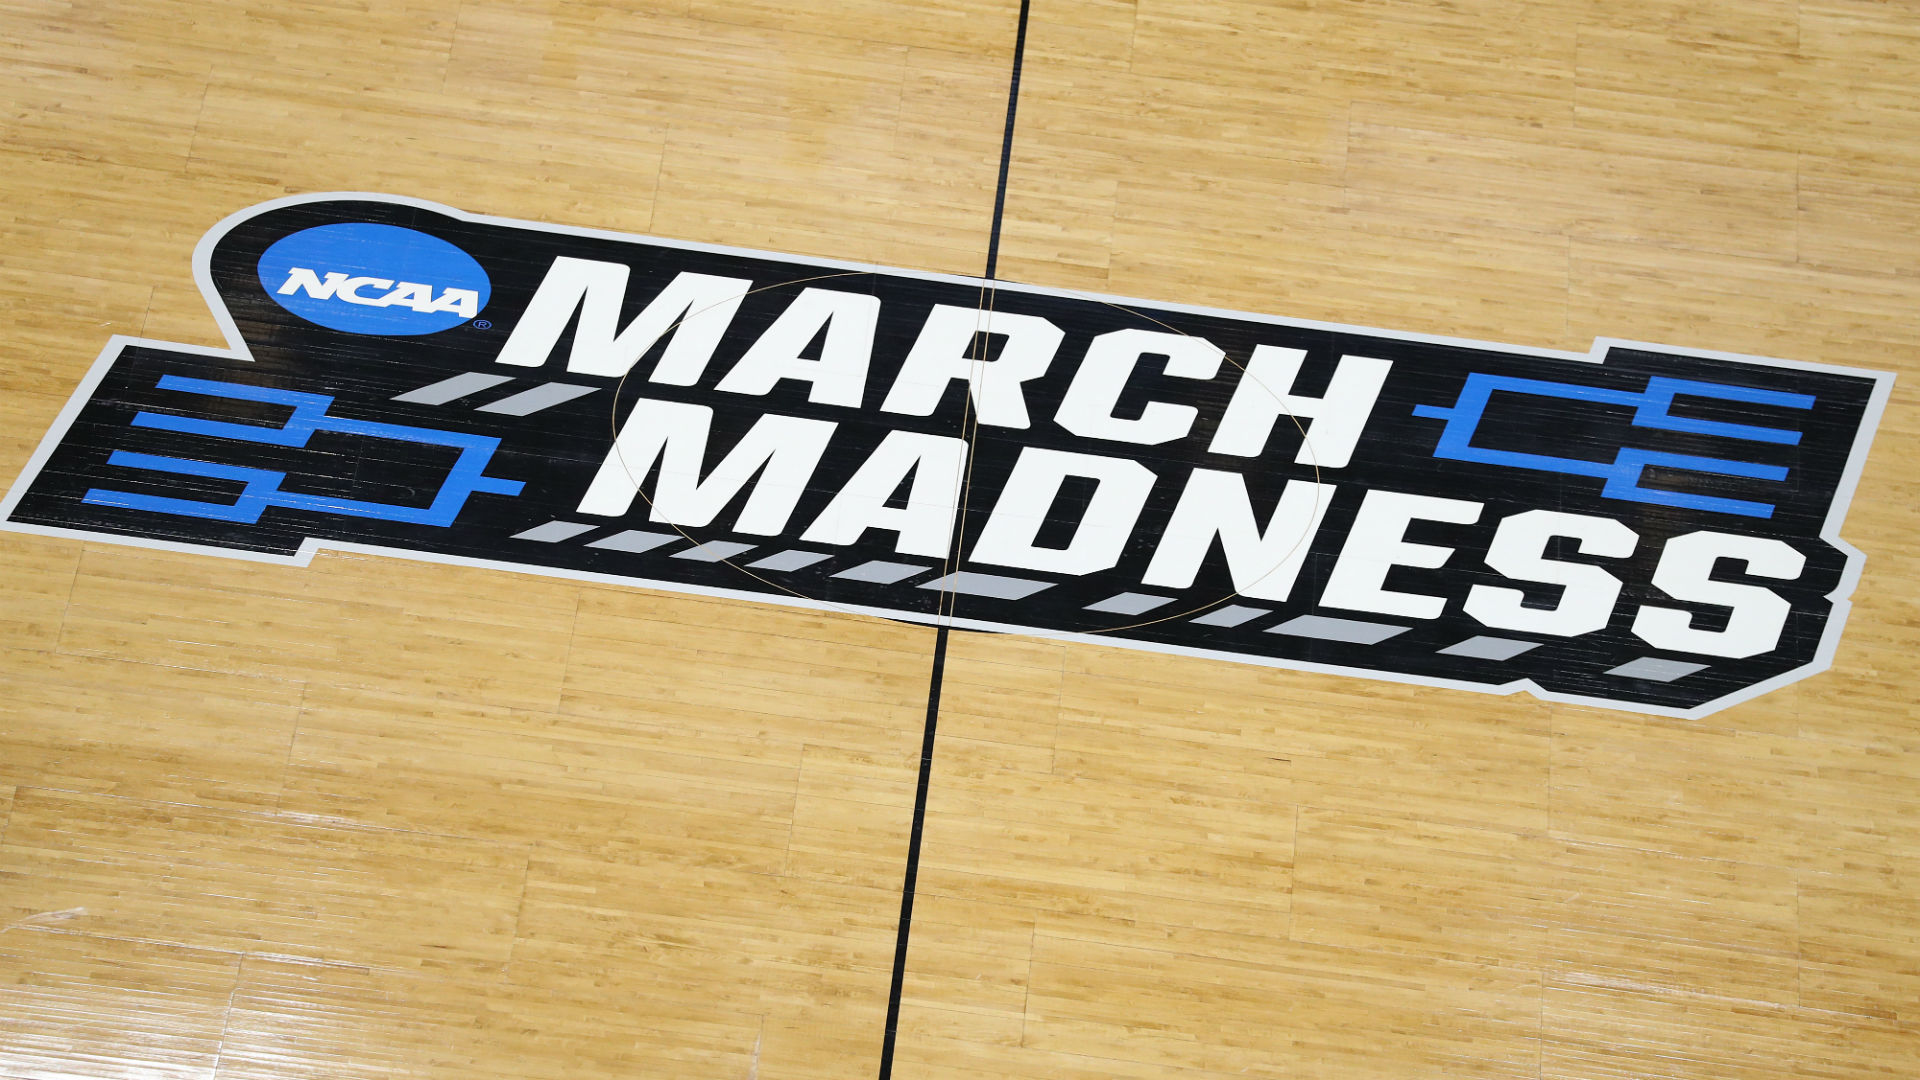 March Madness schedule 2021: Full bracket, dates, times, TV channels for every NCAA Tournament